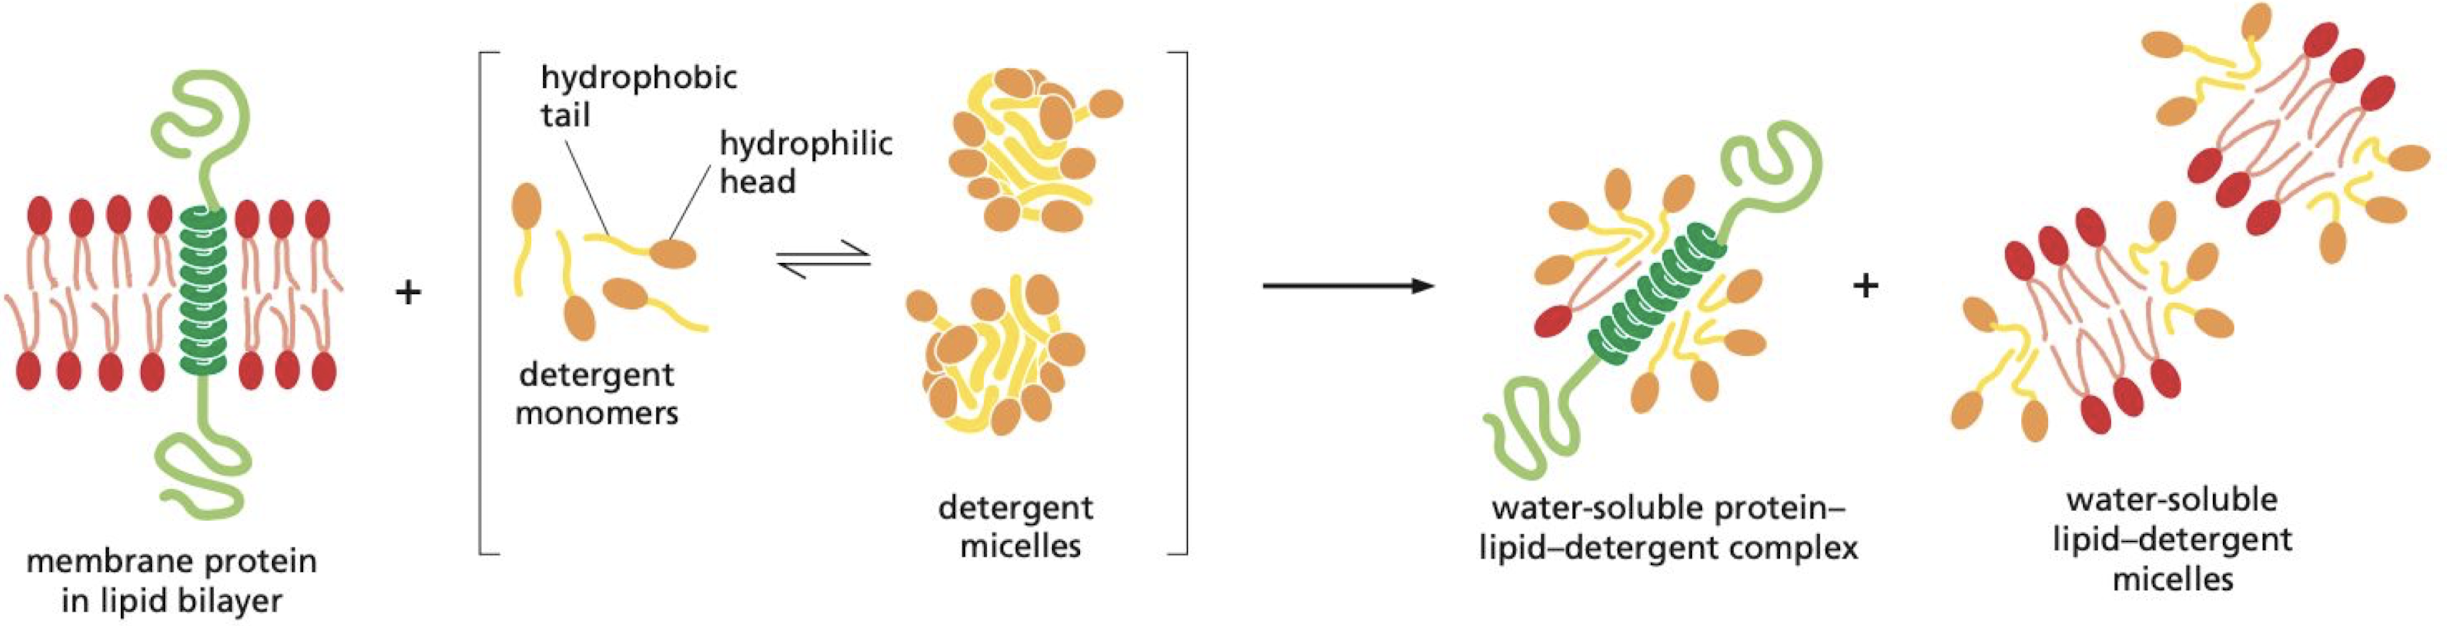 <p>hydrophobic ends of detergents attach to the hydrophobic parts of membrane proteins, pushing out lipid molecules and forming a collar of detergent molecules. Since the other end of the detergent is polar, this interaction helps dissolve the membrane proteins in solution, forming detergent-protein complexes.</p>